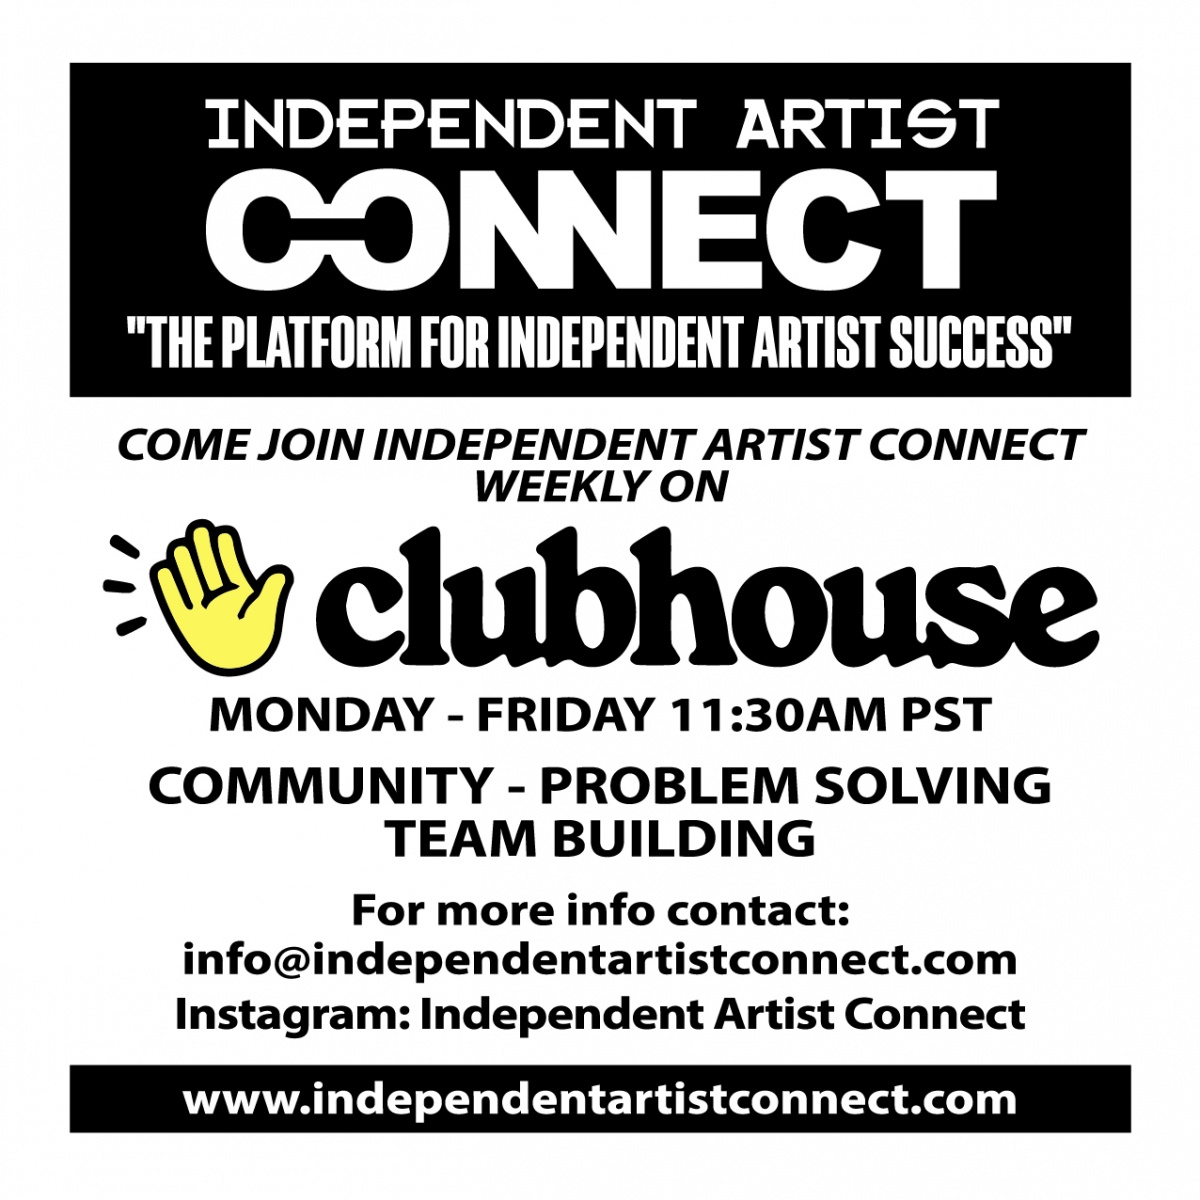 Event: JOIN US ON CLUB HOUSE WEEKLY!